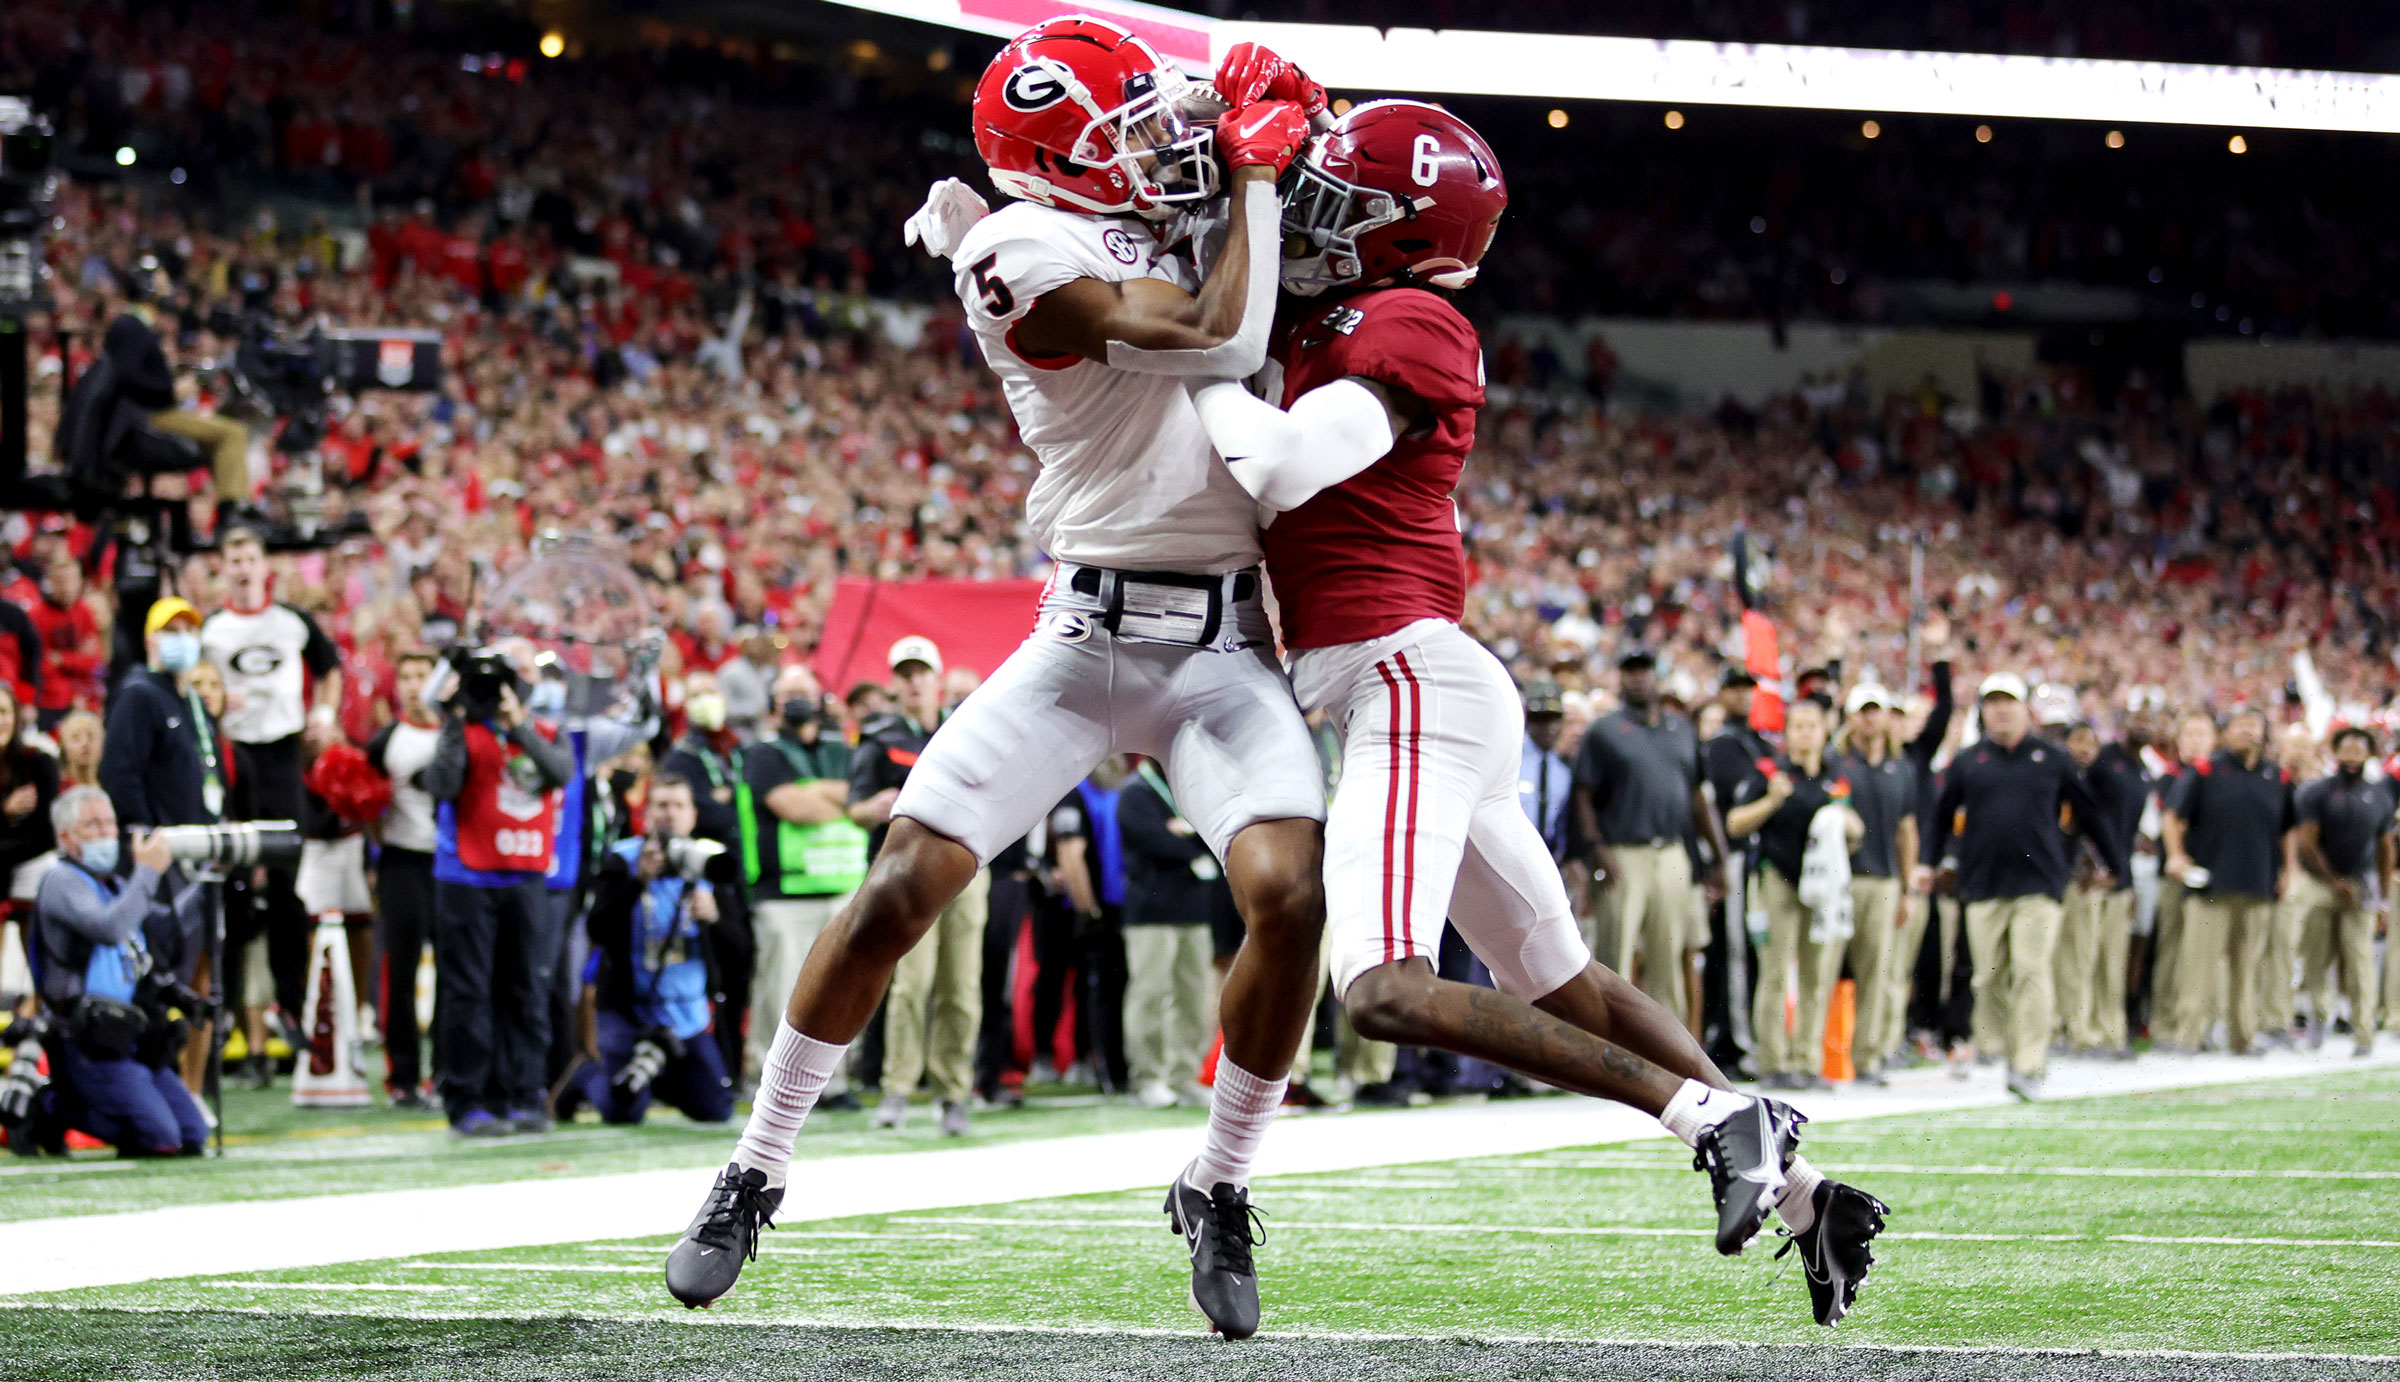 Georgia wide receiver Adonai Mitchell catches the ball for a 40-yard touchdown as he's defended by Khyree Jackson in the fourth quarter.